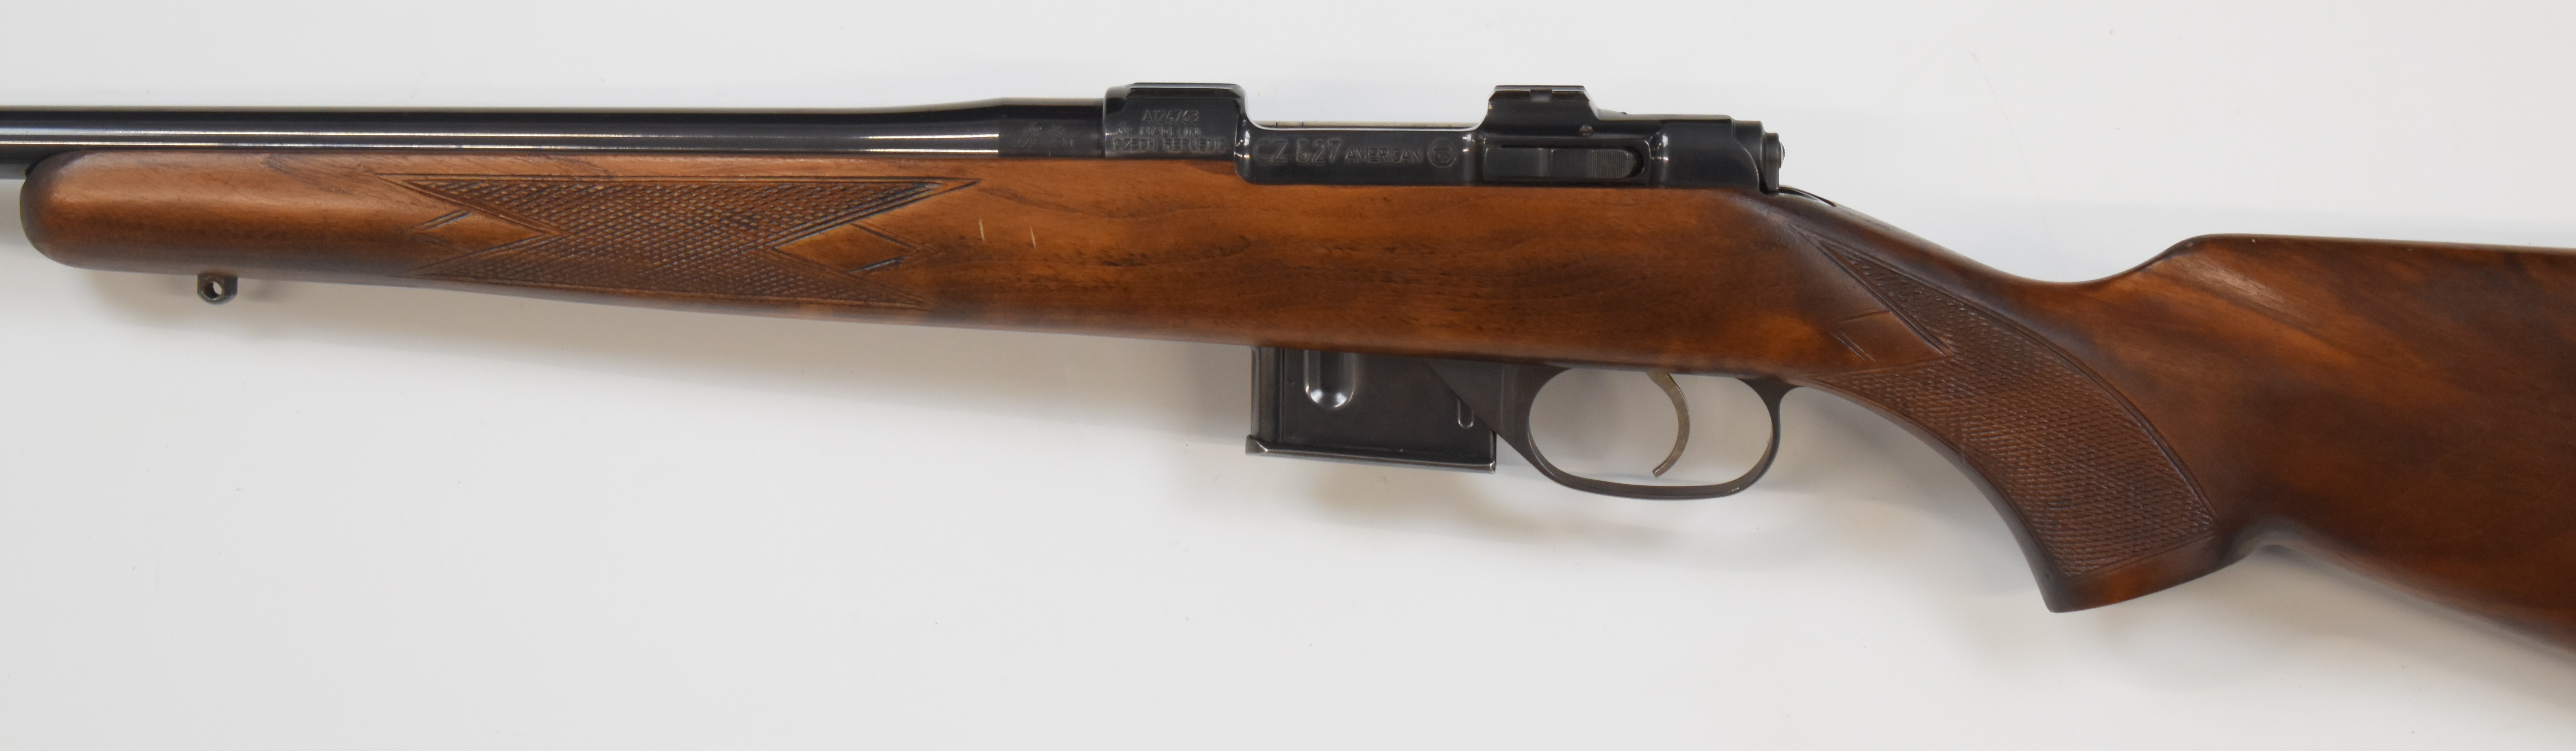 CZ 527 American .222 Remington bolt-action rifle with chequered semi-pistol grip and forend, sling - Image 8 of 10